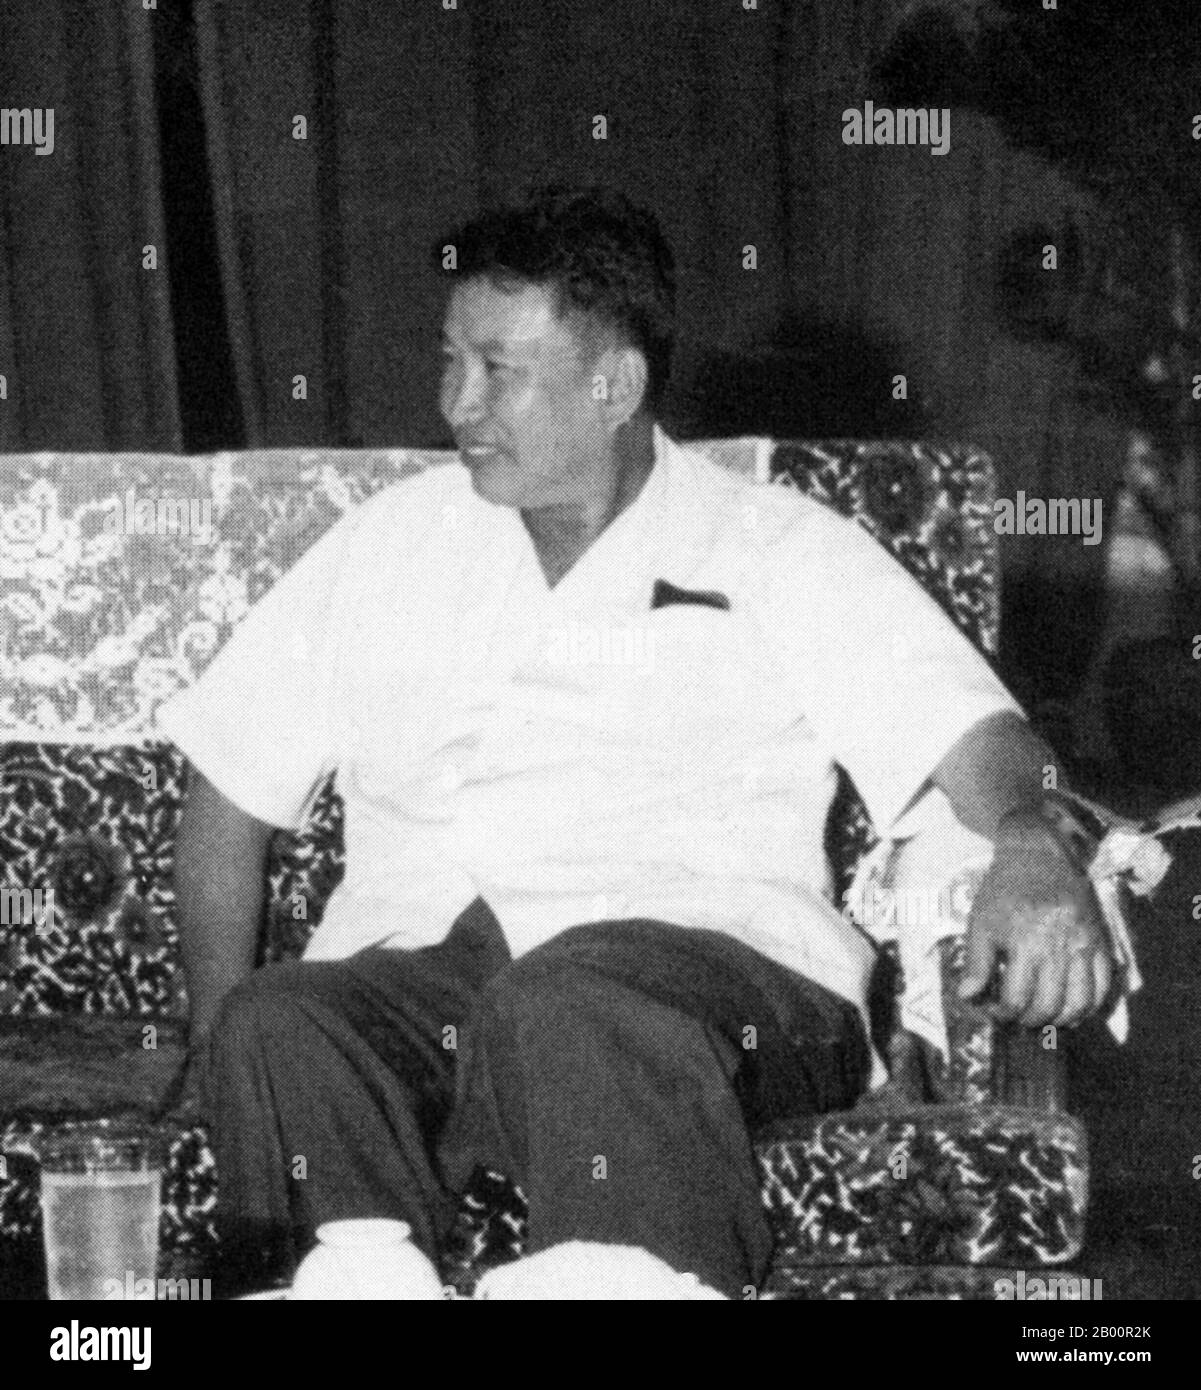 Cambodia: Saloth Sar (1928–1998), better known as Pol Pot.  Saloth Sar (May 19, 1928–April 15, 1998), better known as Pol Pot, was the leader of the Cambodian communist movement known as the Khmer Rouge and Prime Minister of Democratic Kampuchea from 1976–1979. In 1979, after the invasion of Cambodia by Vietnam, Pol Pot fled into the jungles of southwest Cambodia. Pol Pot died in 1998 while held under house arrest by the Ta Mok faction of the Khmer Rouge. Stock Photo